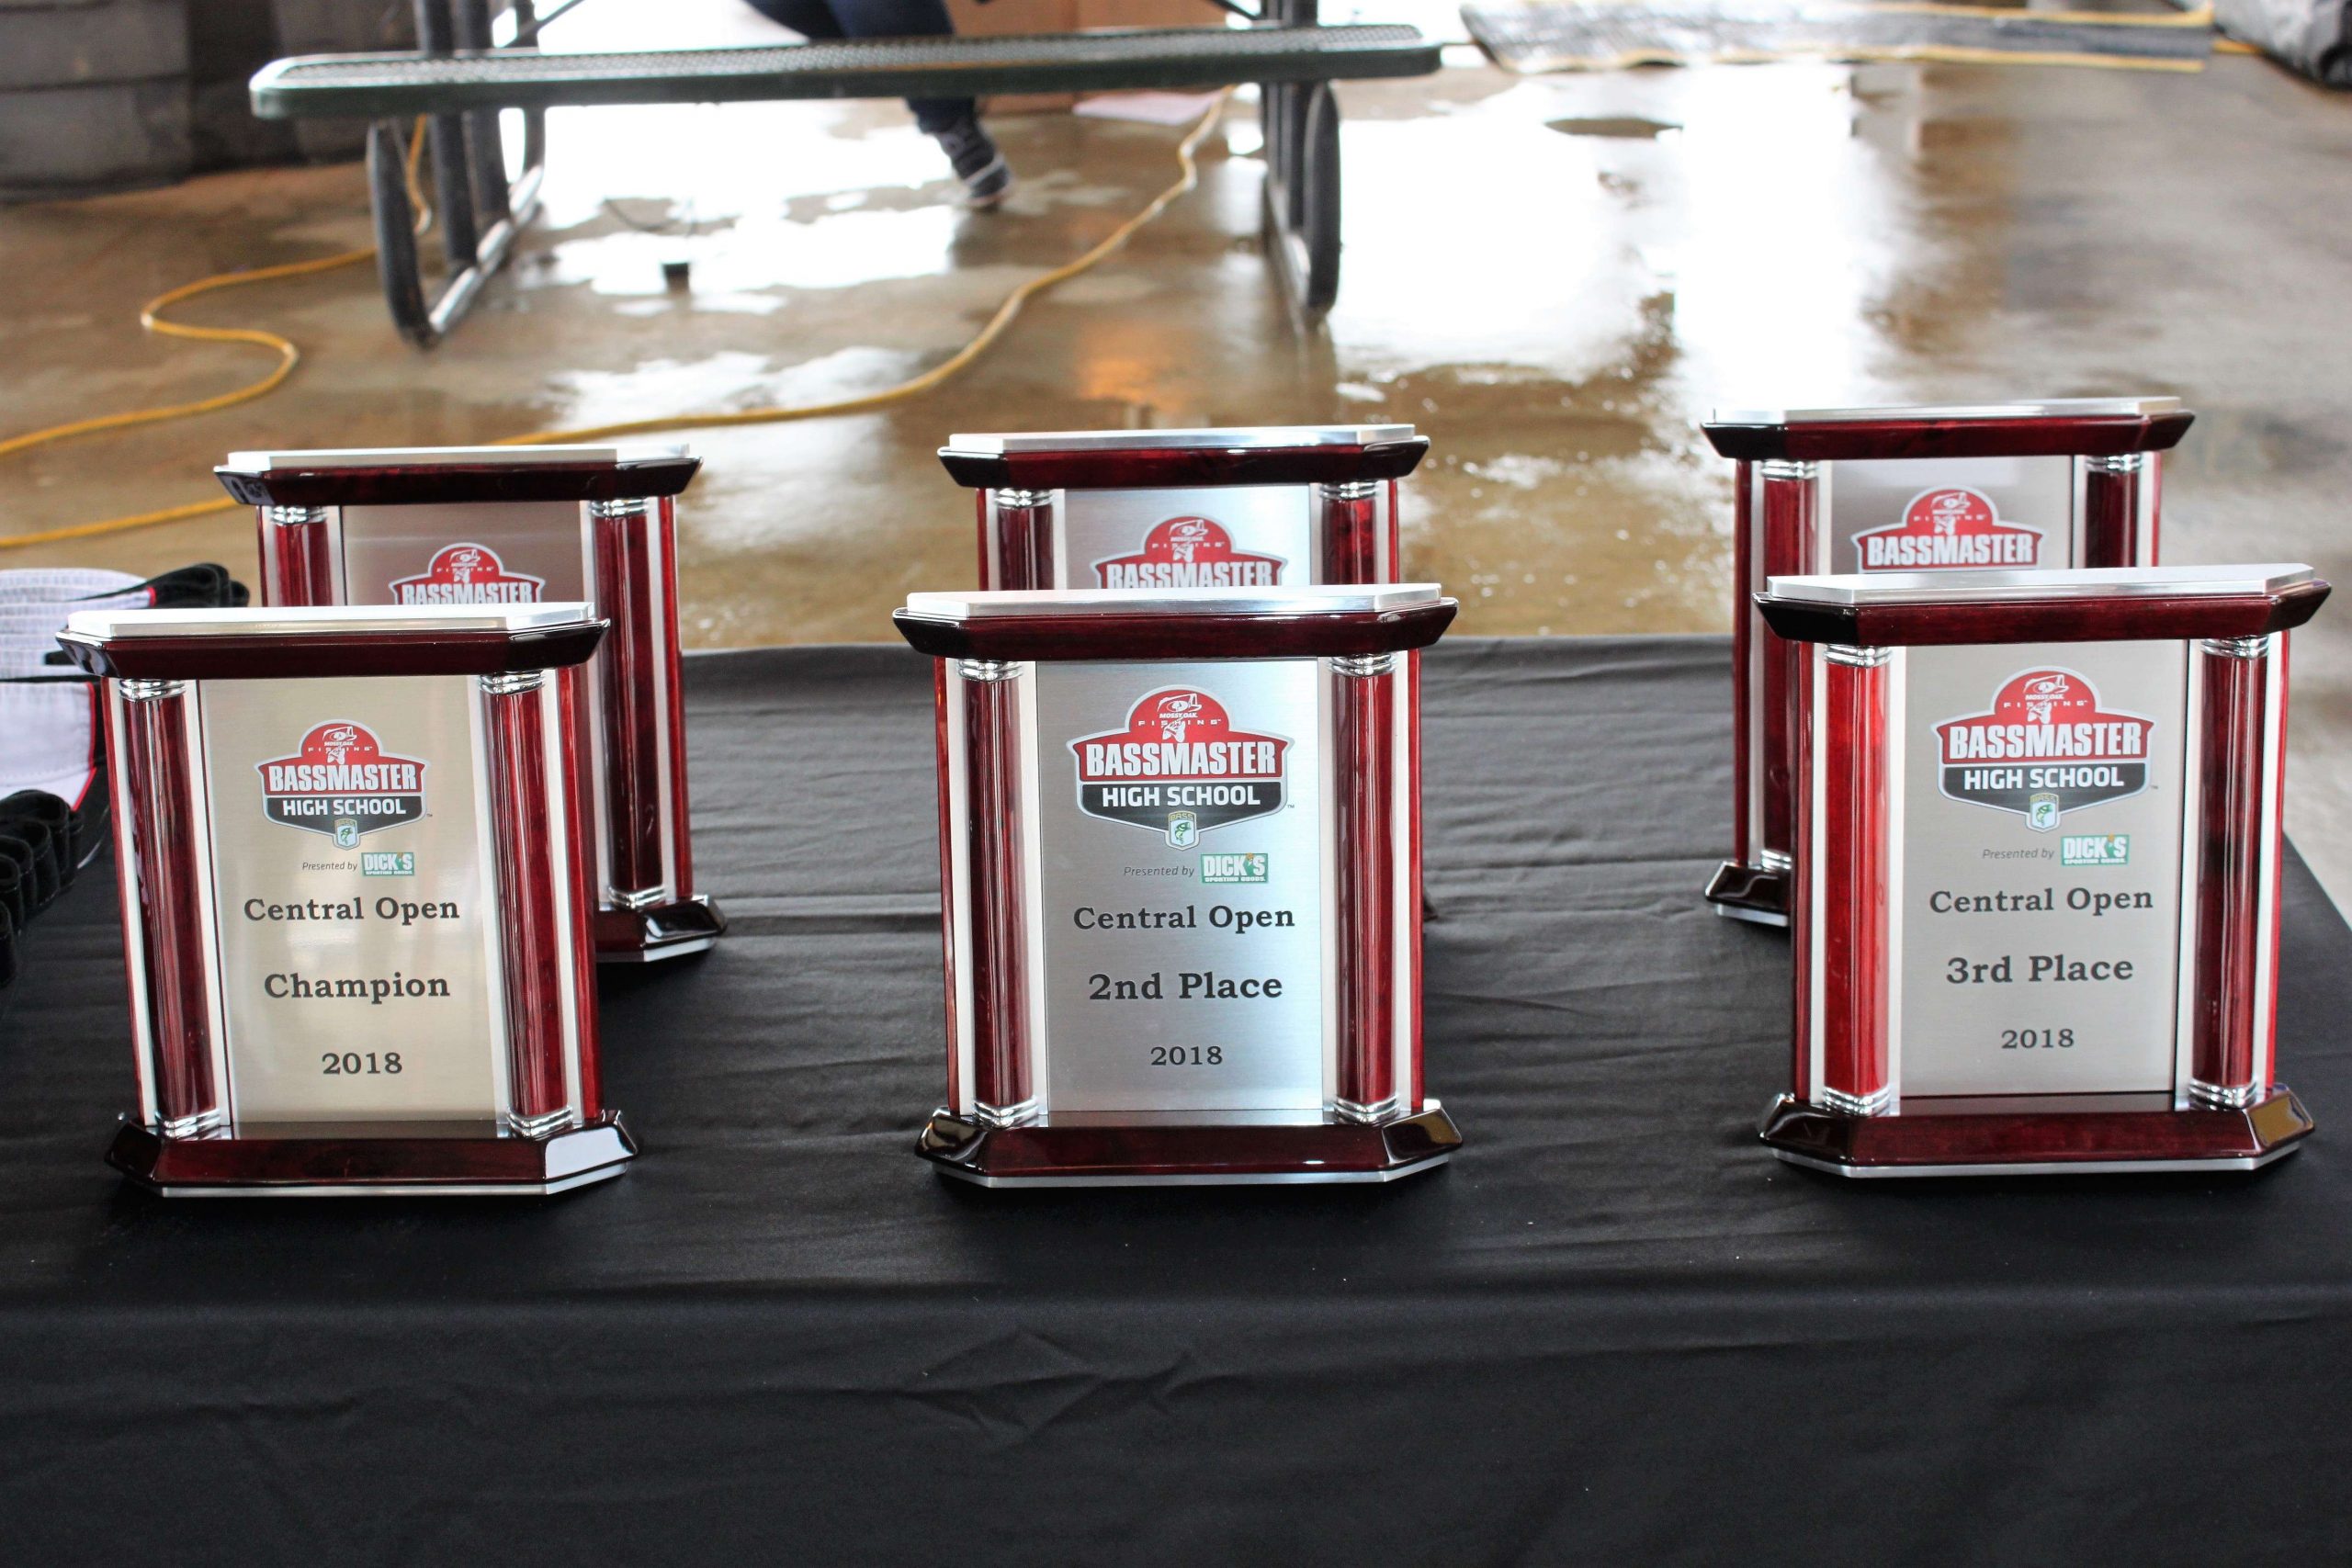 Catch a ShareLunker tomorrow and you likely go home with one of these handsome trophies.